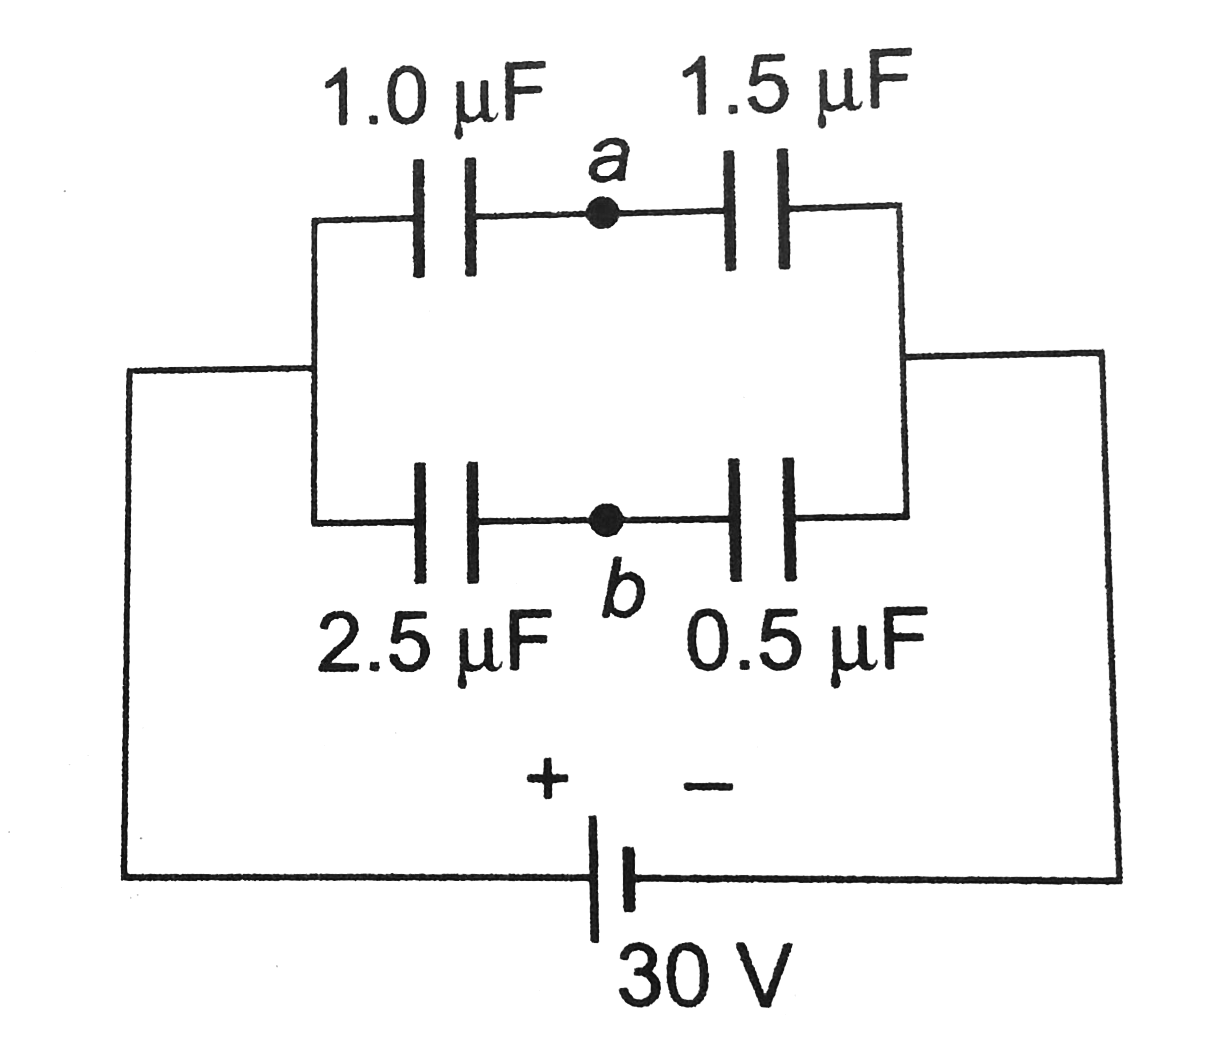 Four capacitors are connected as shown in figuere to a 30 V battery. The potential difference between points a and b